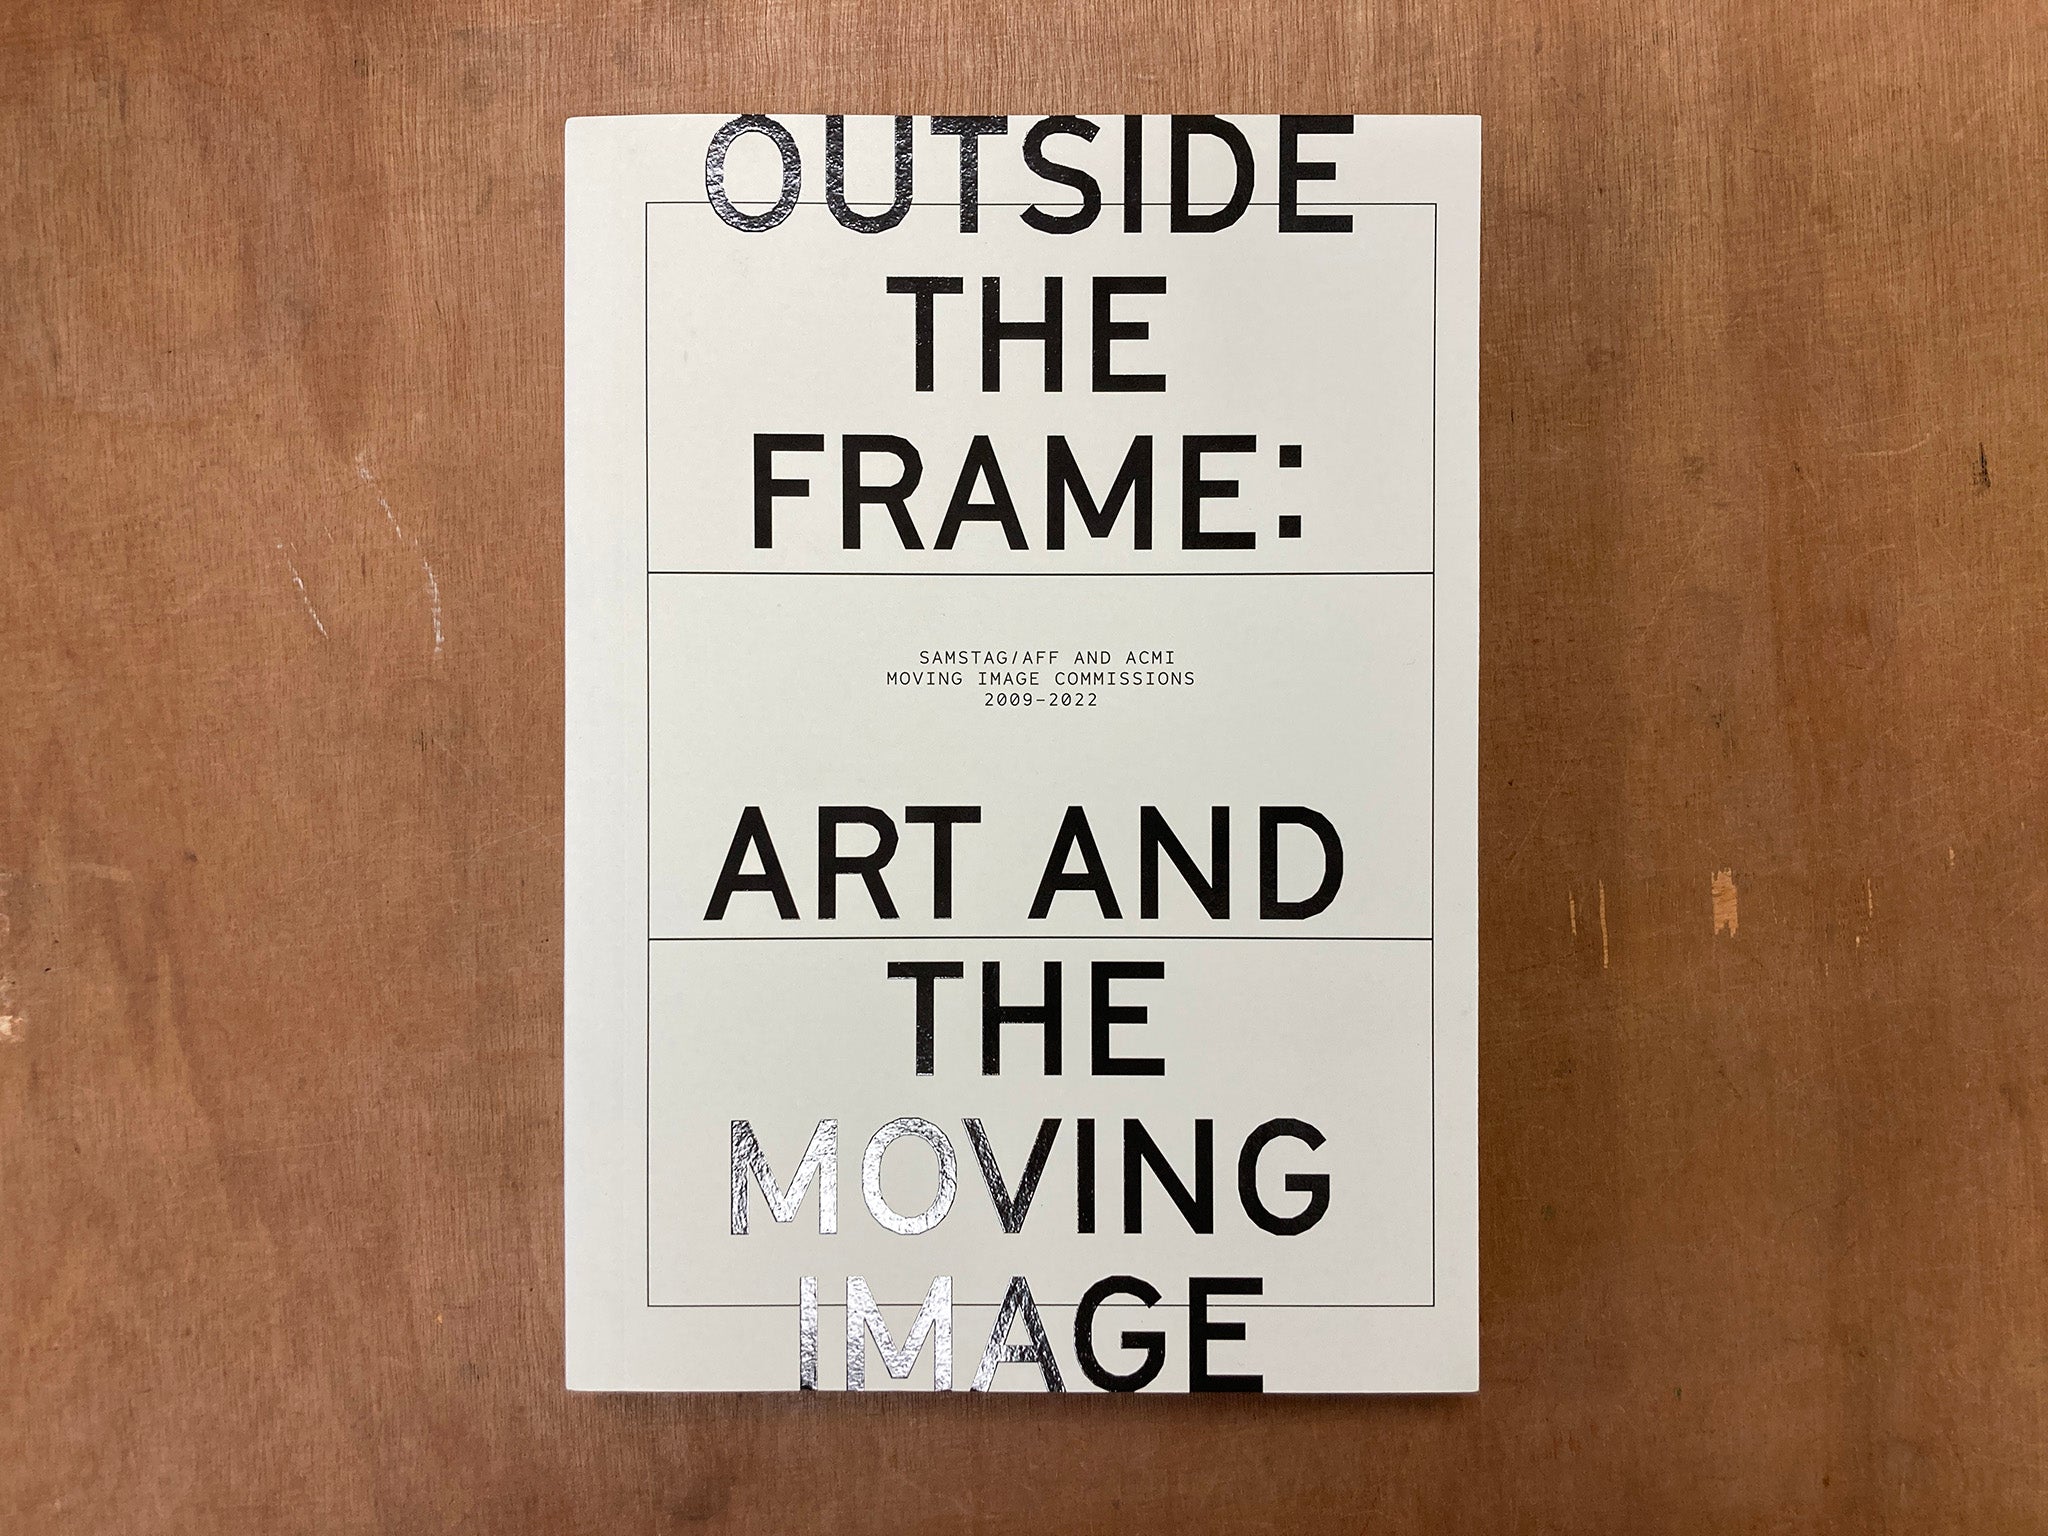 OUTSIDE THE FRAME: ART AND THE MOVING IMAGE. SAMSTAG & ACMI MOVING IMAGE COMMISSIONS